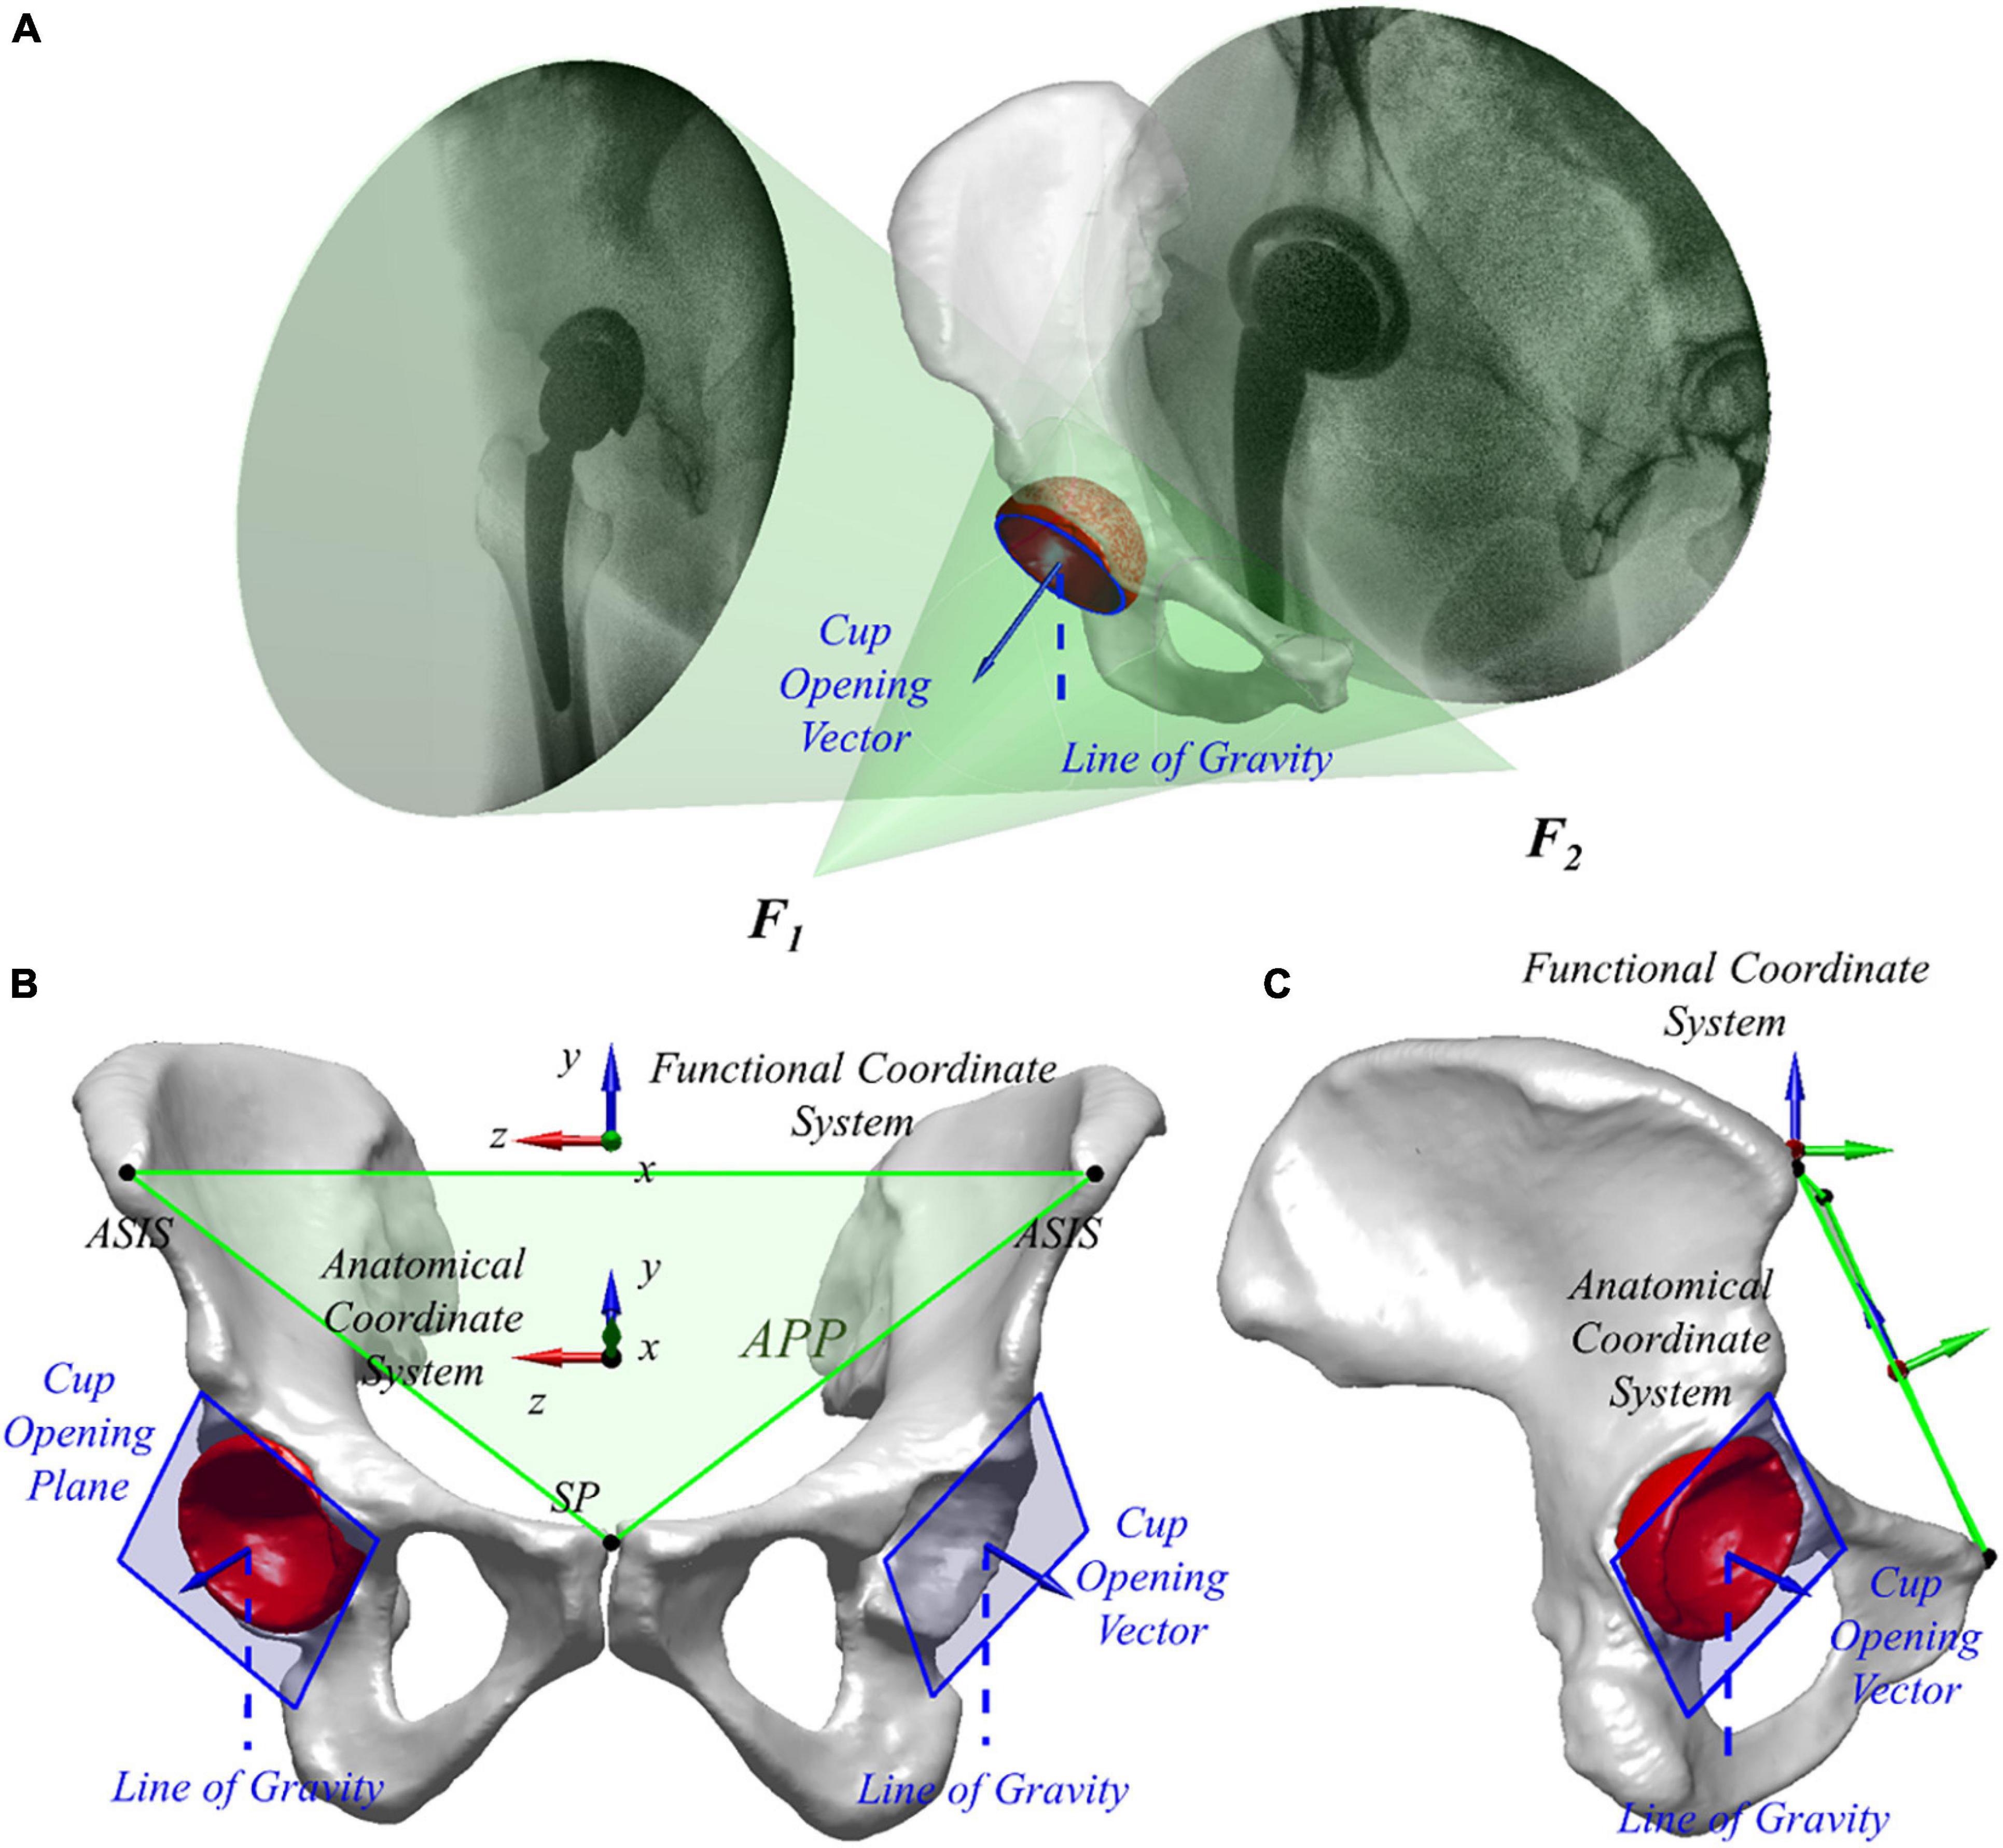 Frontiers  Well-Placed Acetabular Component Oriented Outside the Safe Zone  During Weight-Bearing Daily Activities